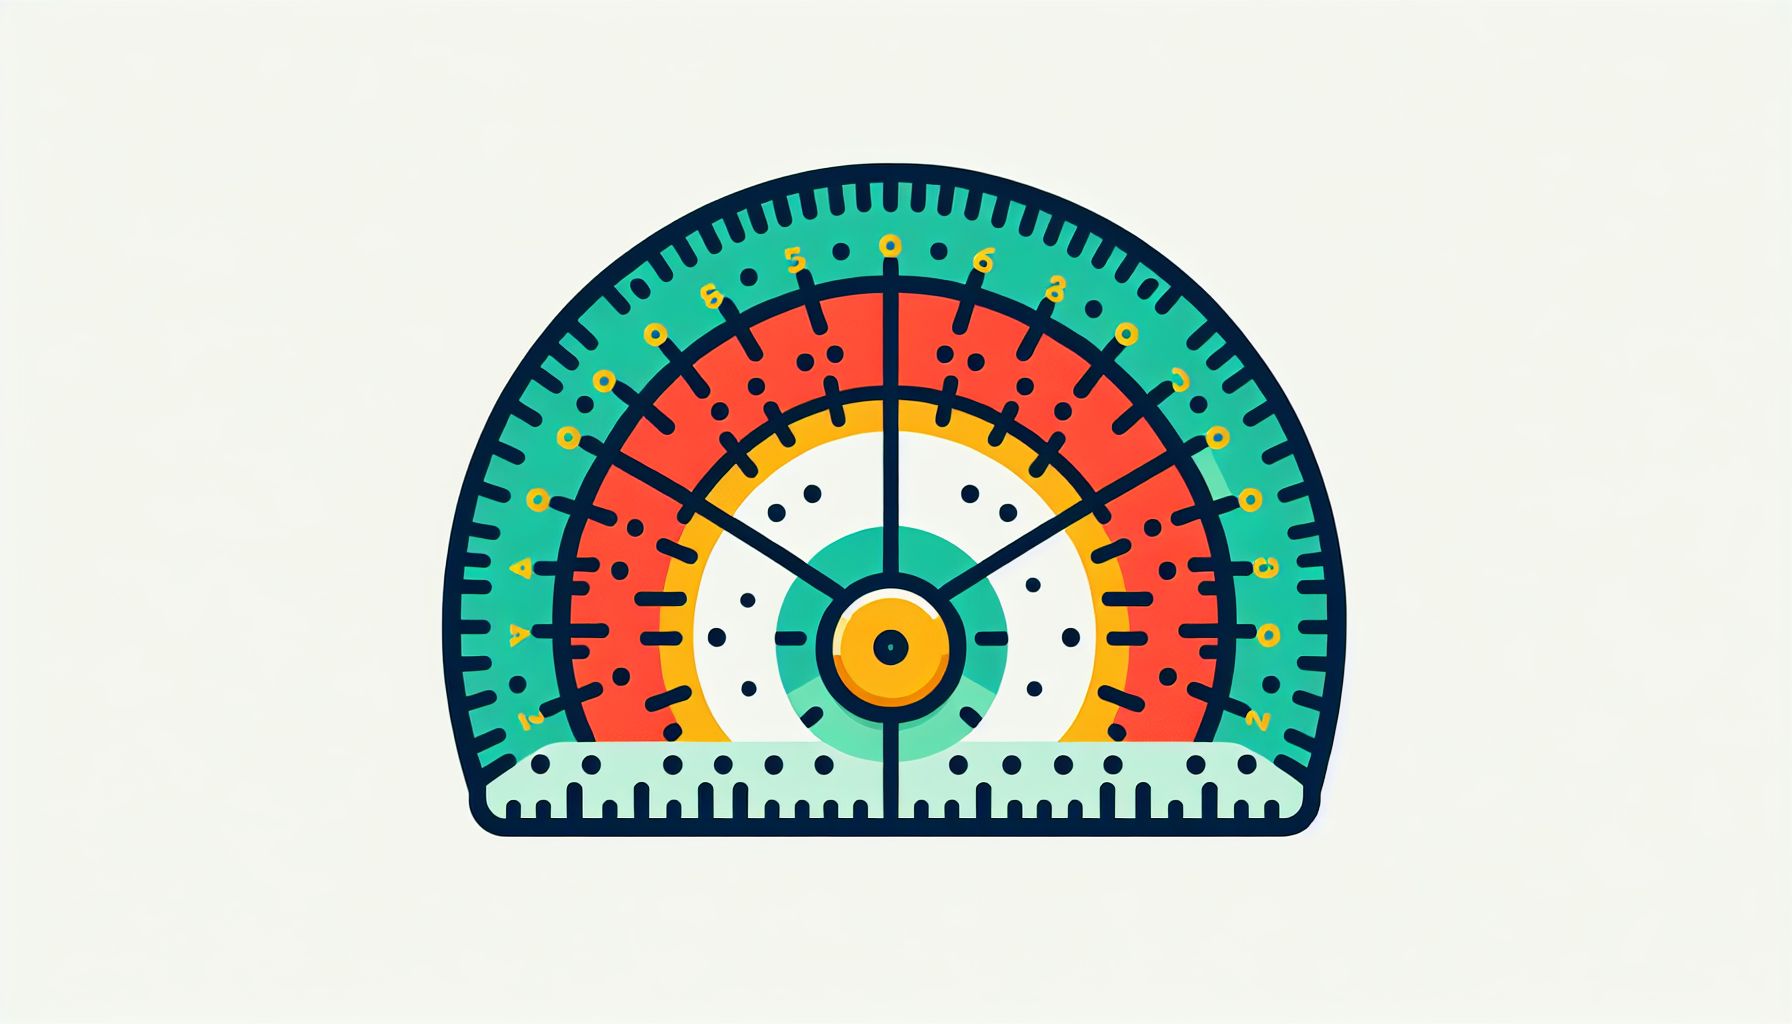 Protractor in flat illustration style and white background, red #f47574, green #88c7a8, yellow #fcc44b, and blue #645bc8 colors.